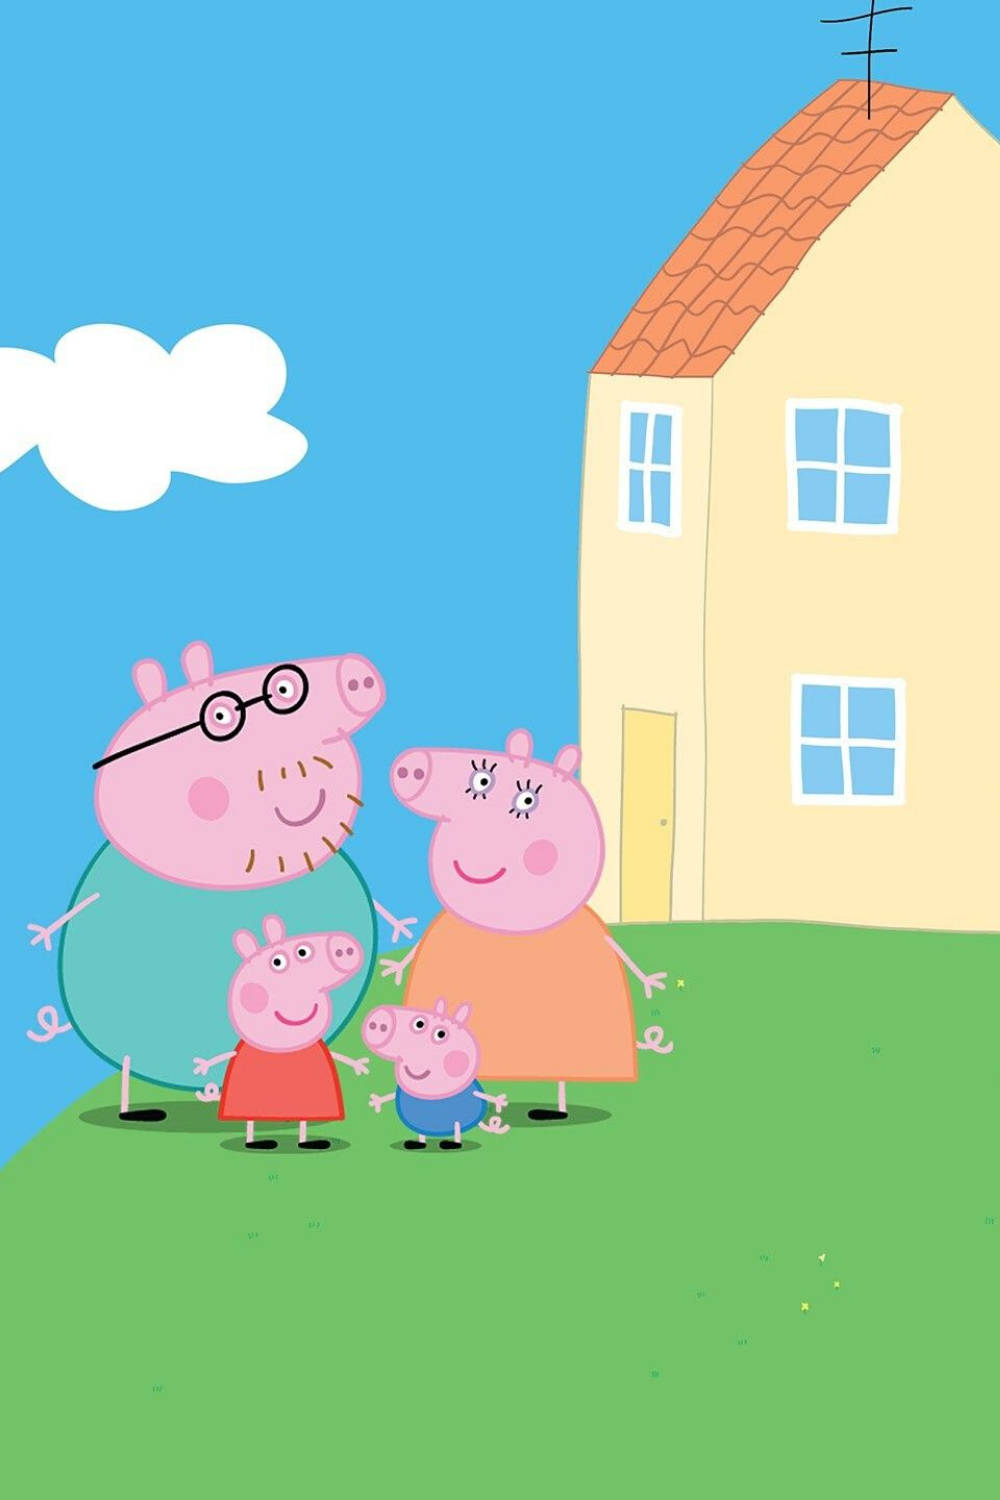 Welcome To Everyone's Favorite, The Sweet Peppa Pig House! Background